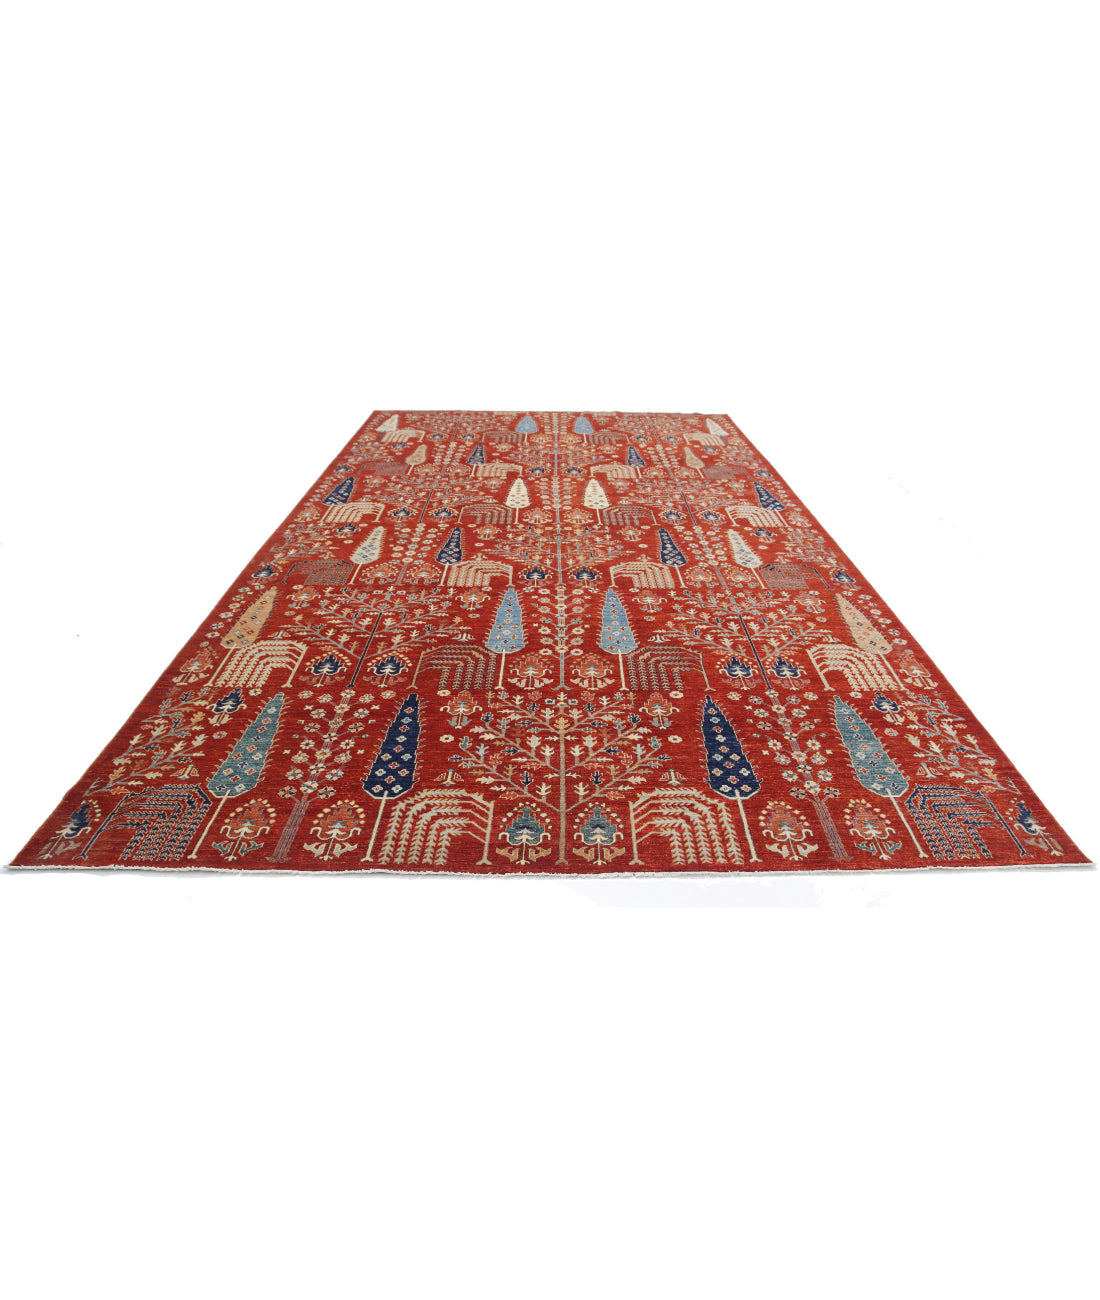 Bakshaish 10'0'' X 17'7'' Hand-Knotted Wool Rug 10'0'' x 17'7'' (300 X 528) / Red / Blue